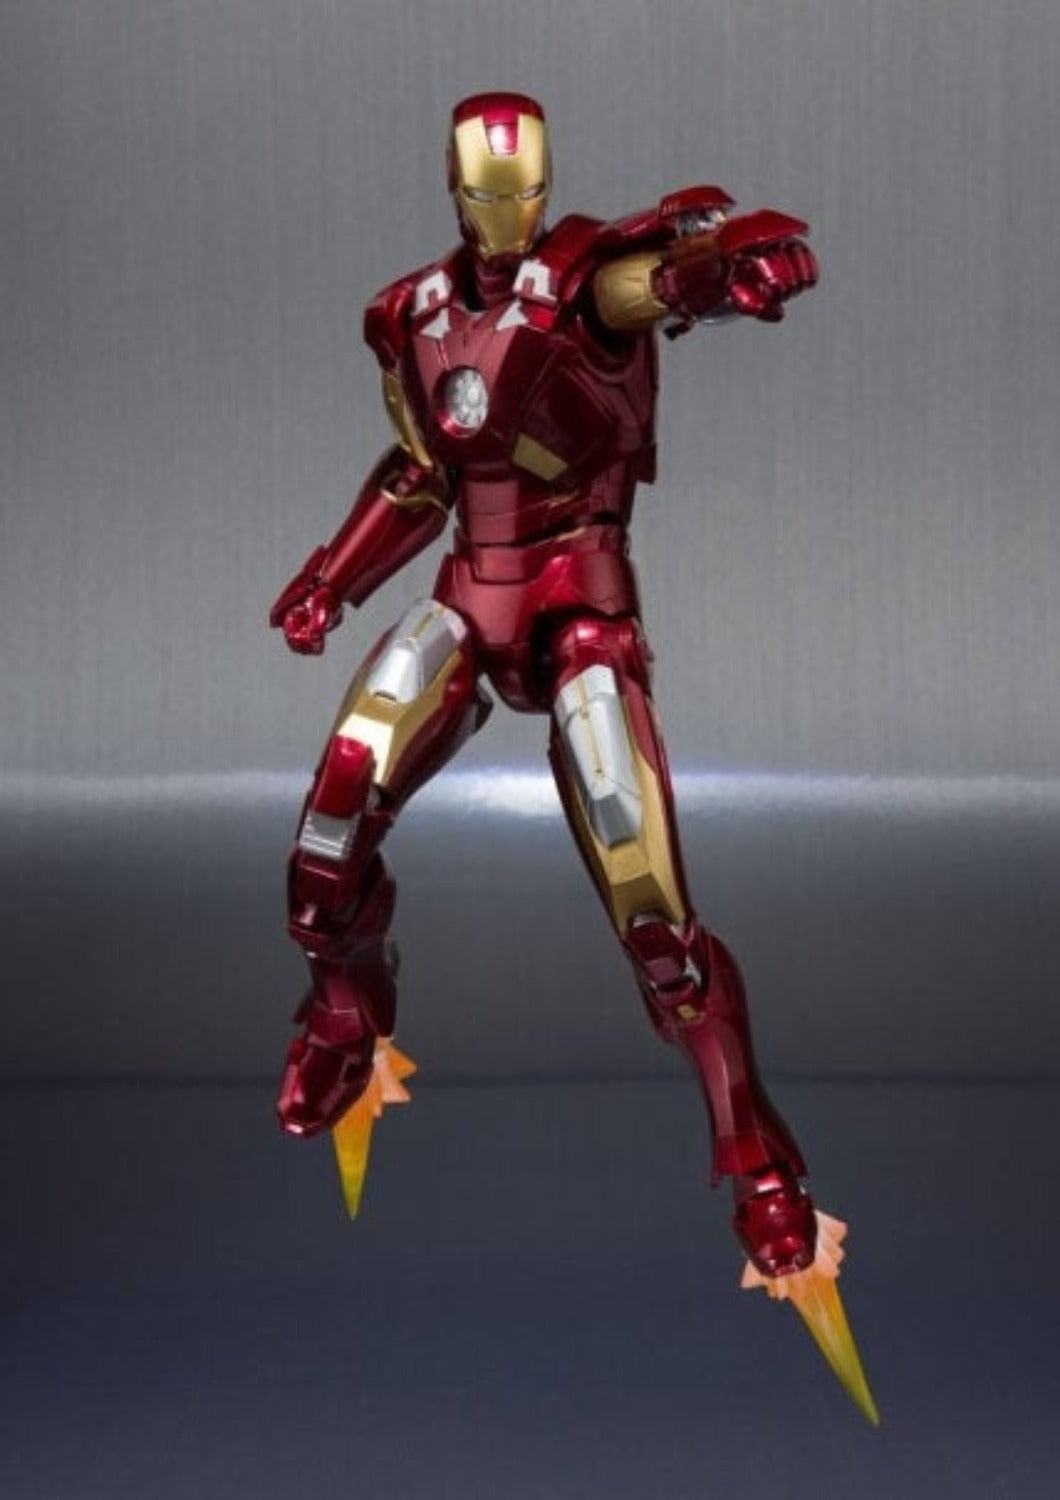 SH FIGUARTS IRONMAN MK-7 AND HALL OF ARMOR - 55100 - Anotoys Collectibles